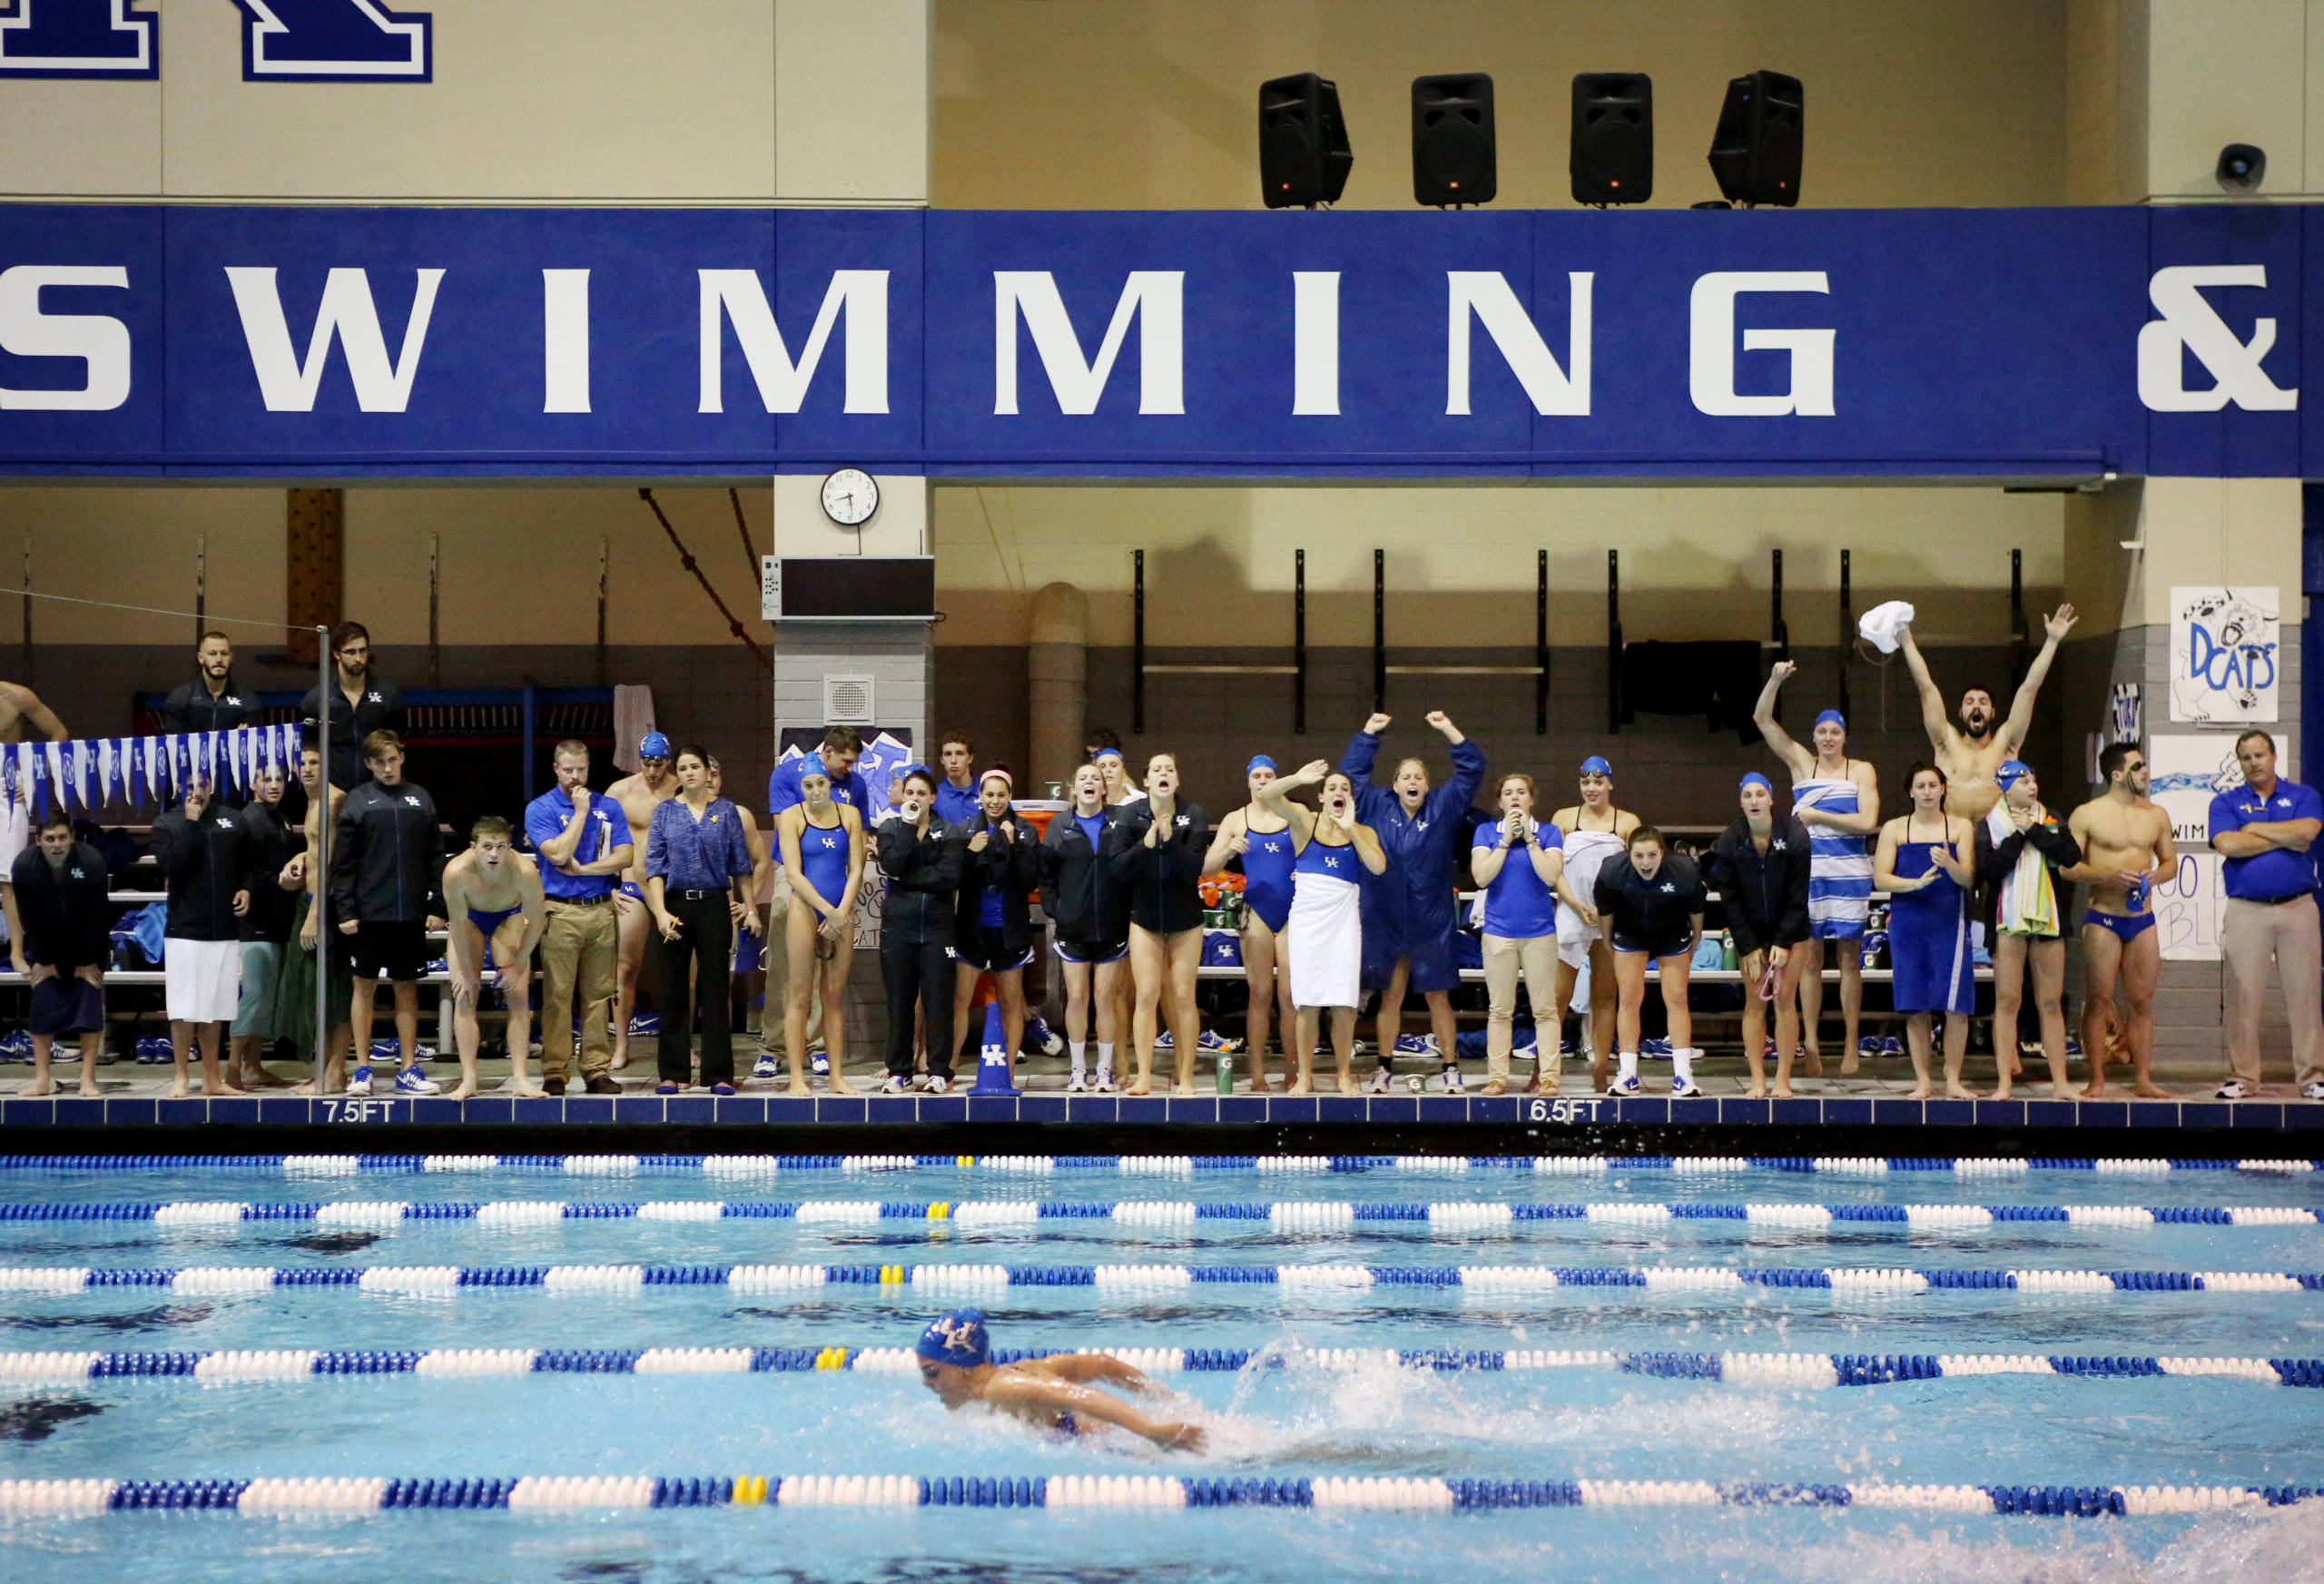 Swimmers to Compete at Sectionals Meet as Lead-In to Nationals